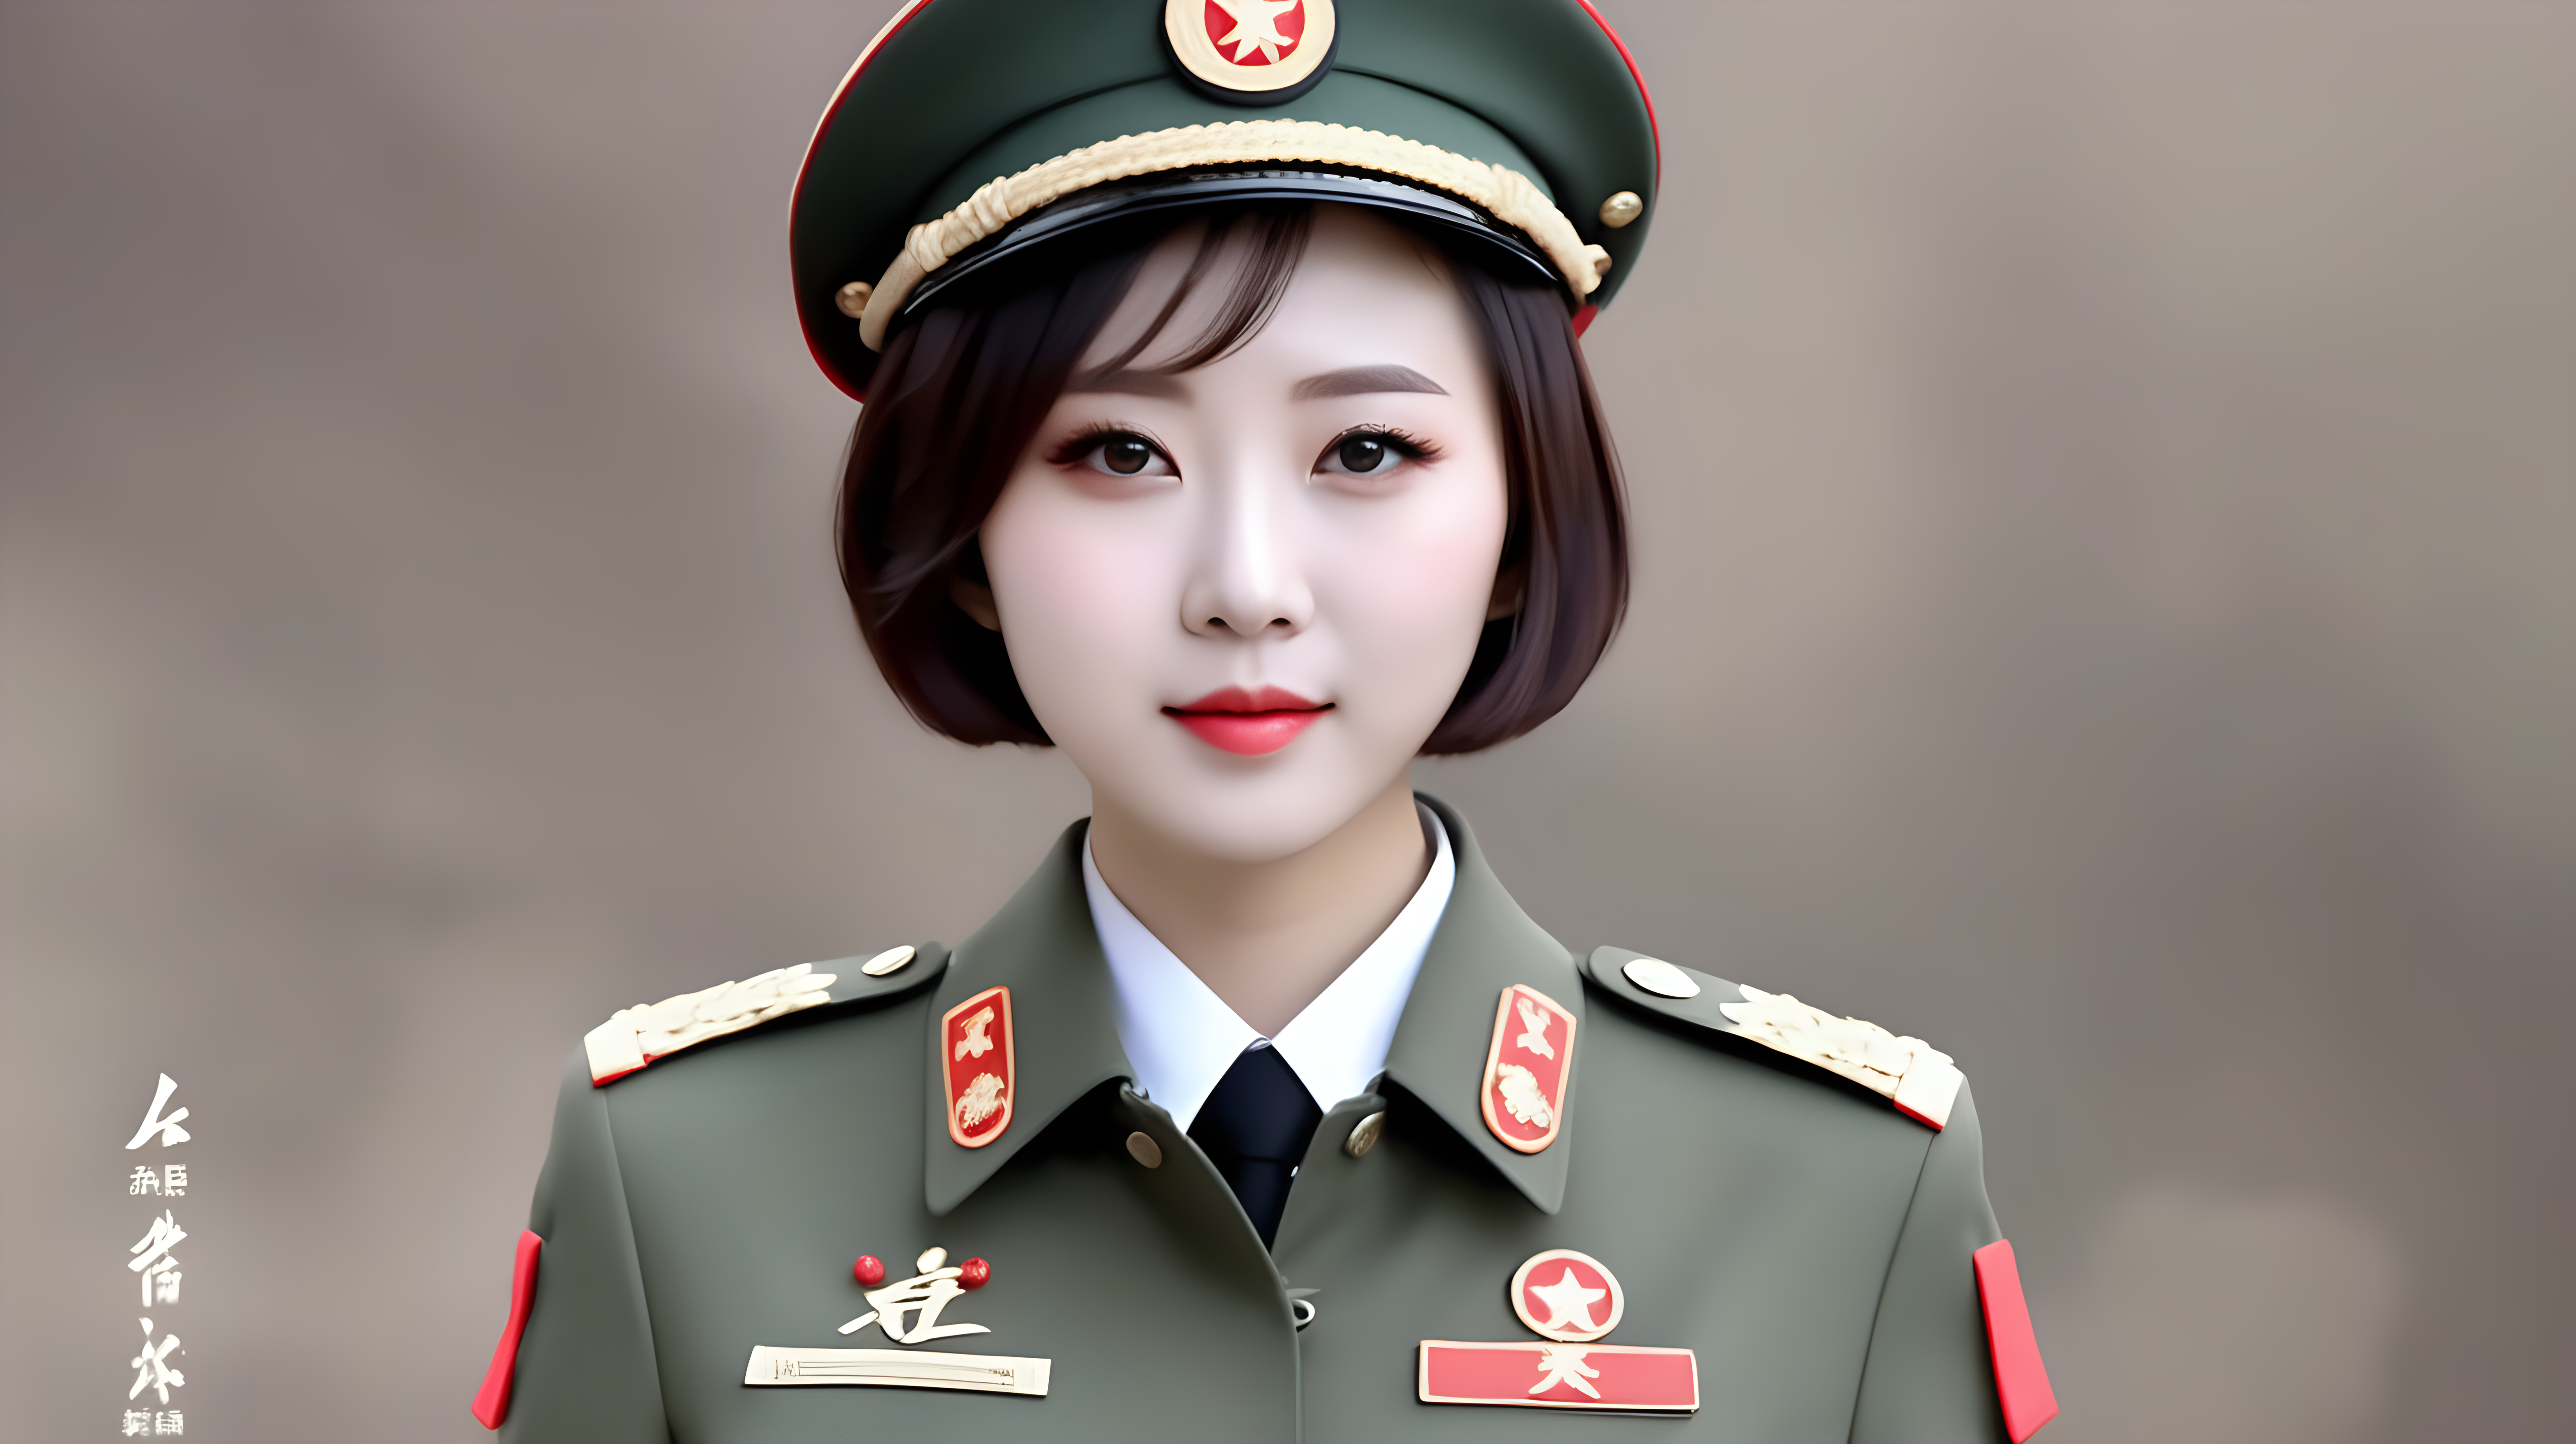 A shorthaired Chinese female soldierCamouflage uniformLive broadcast